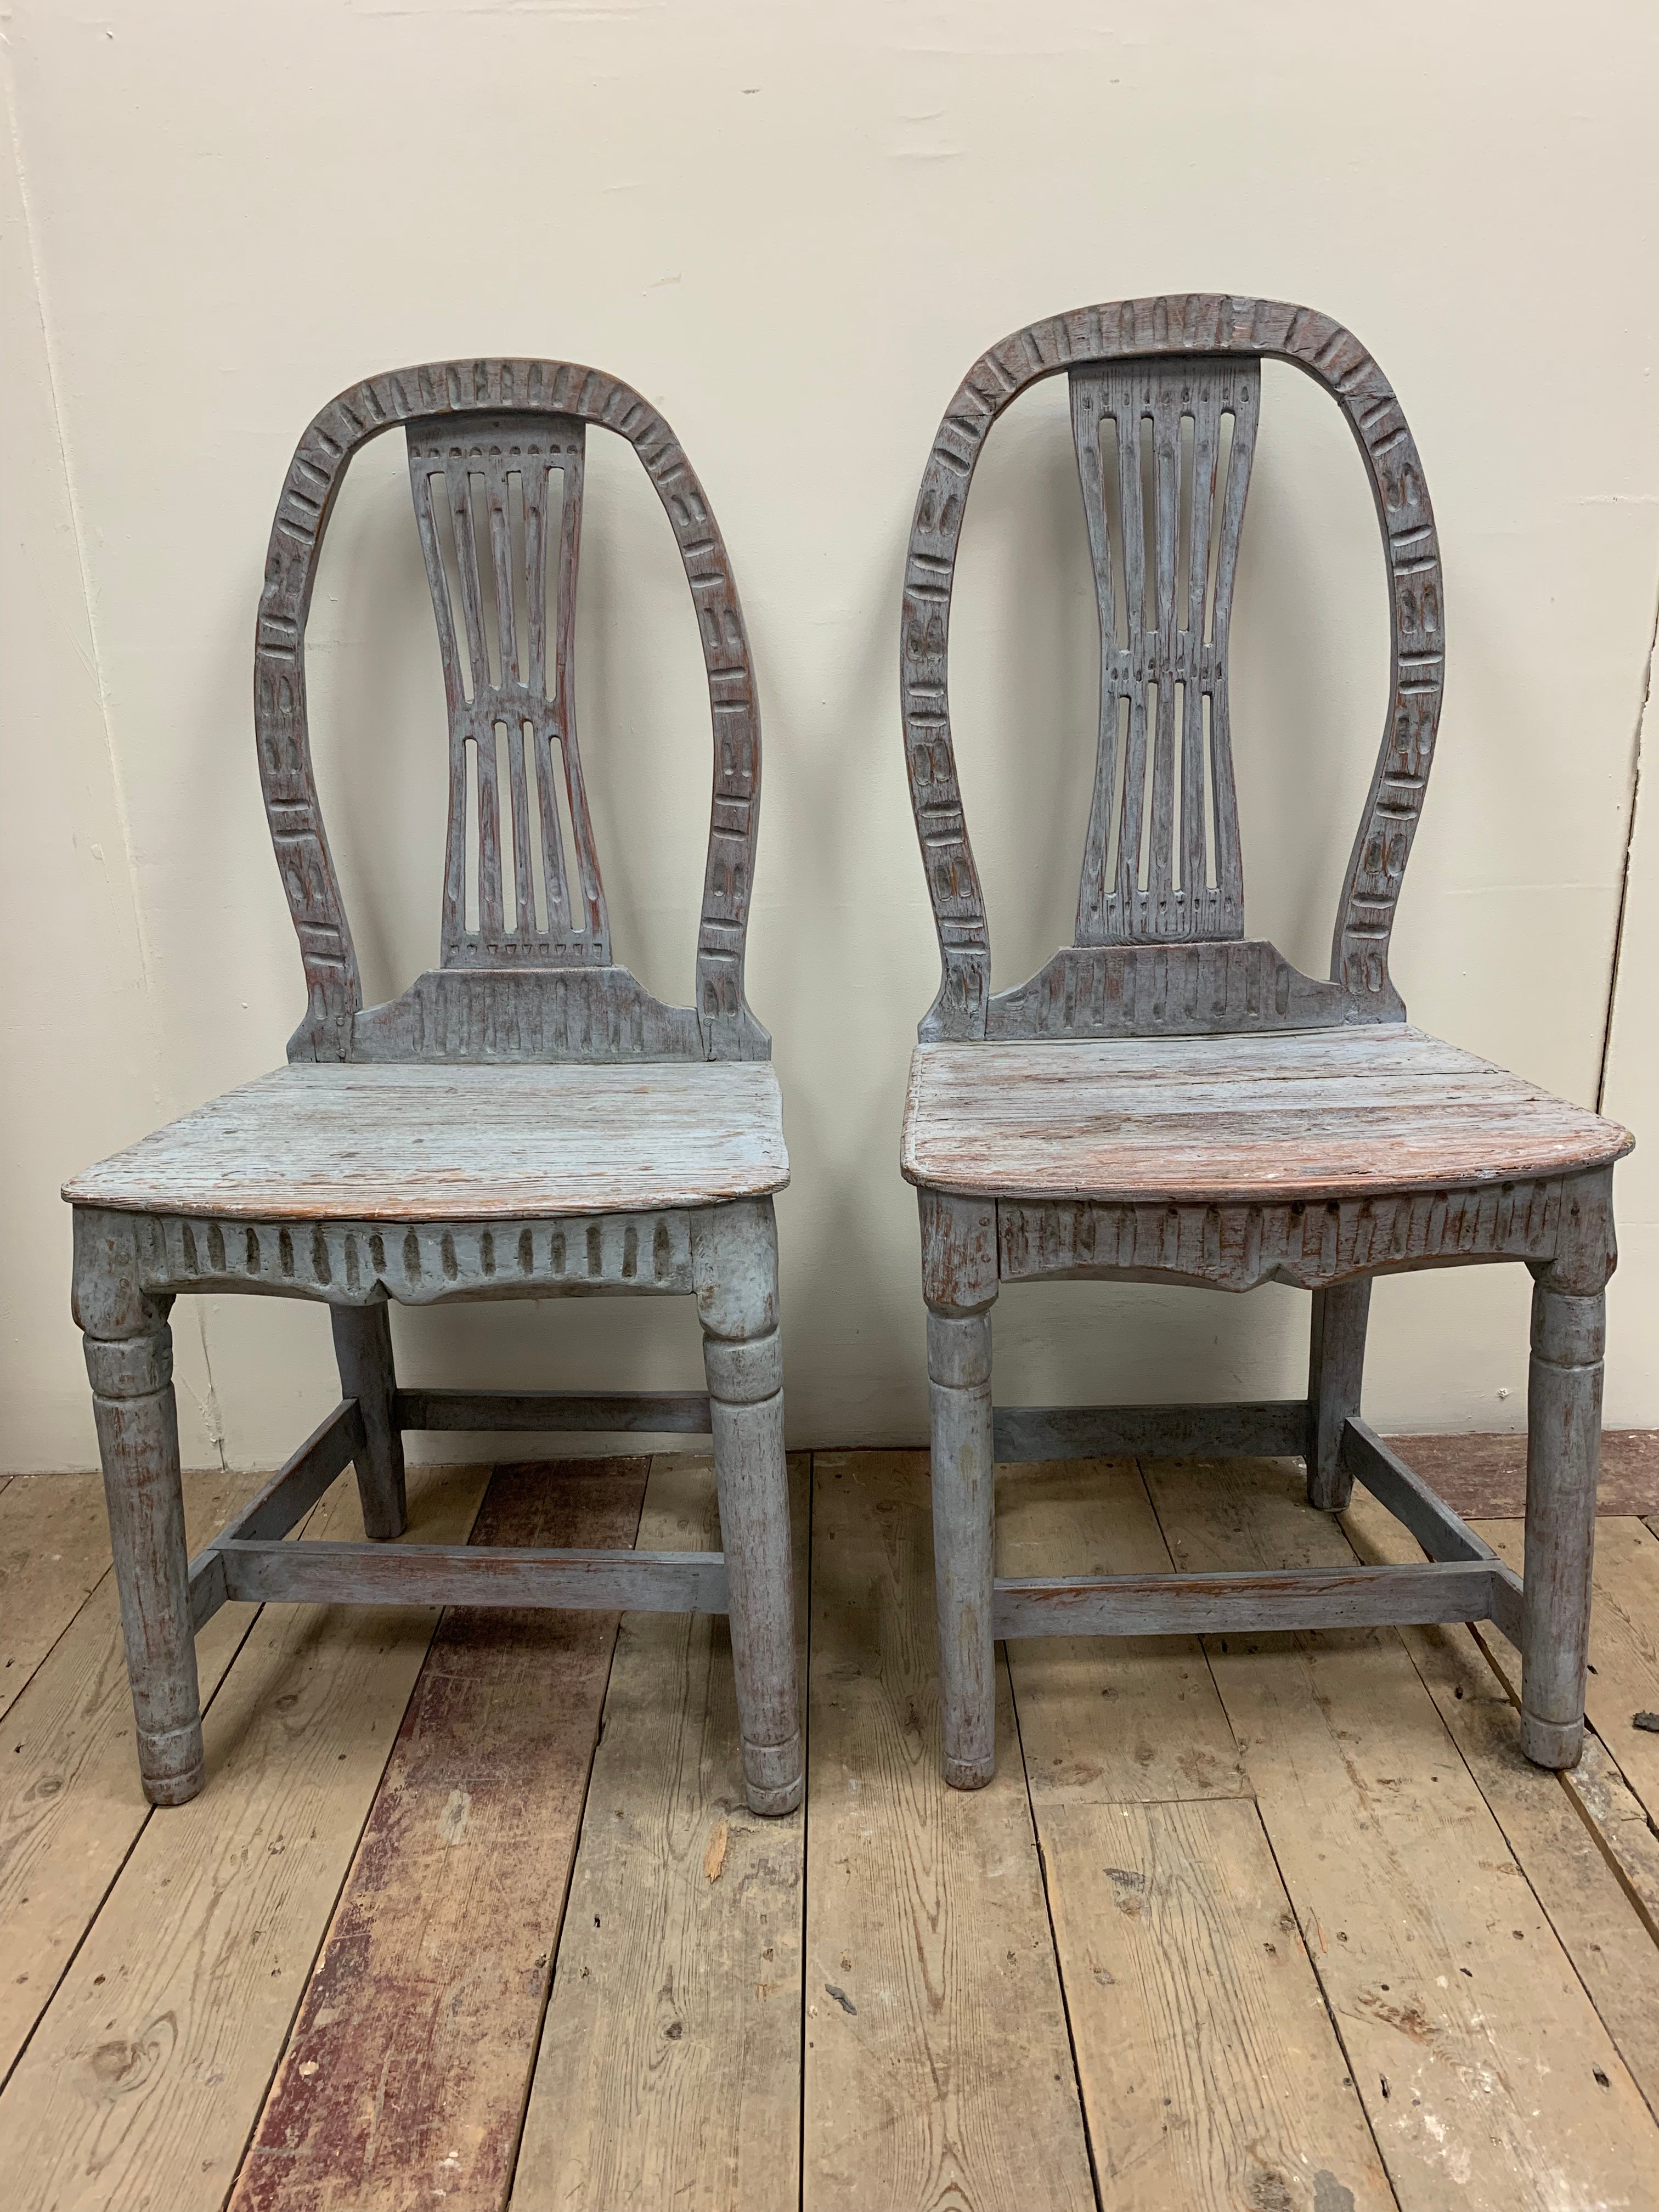 A charming matching set of three circa 19th century painted folk country house chairs.
There are two side chairs and one carver.
All three have been repainted at some point and have subtle differences but have come from the same maker and provincial